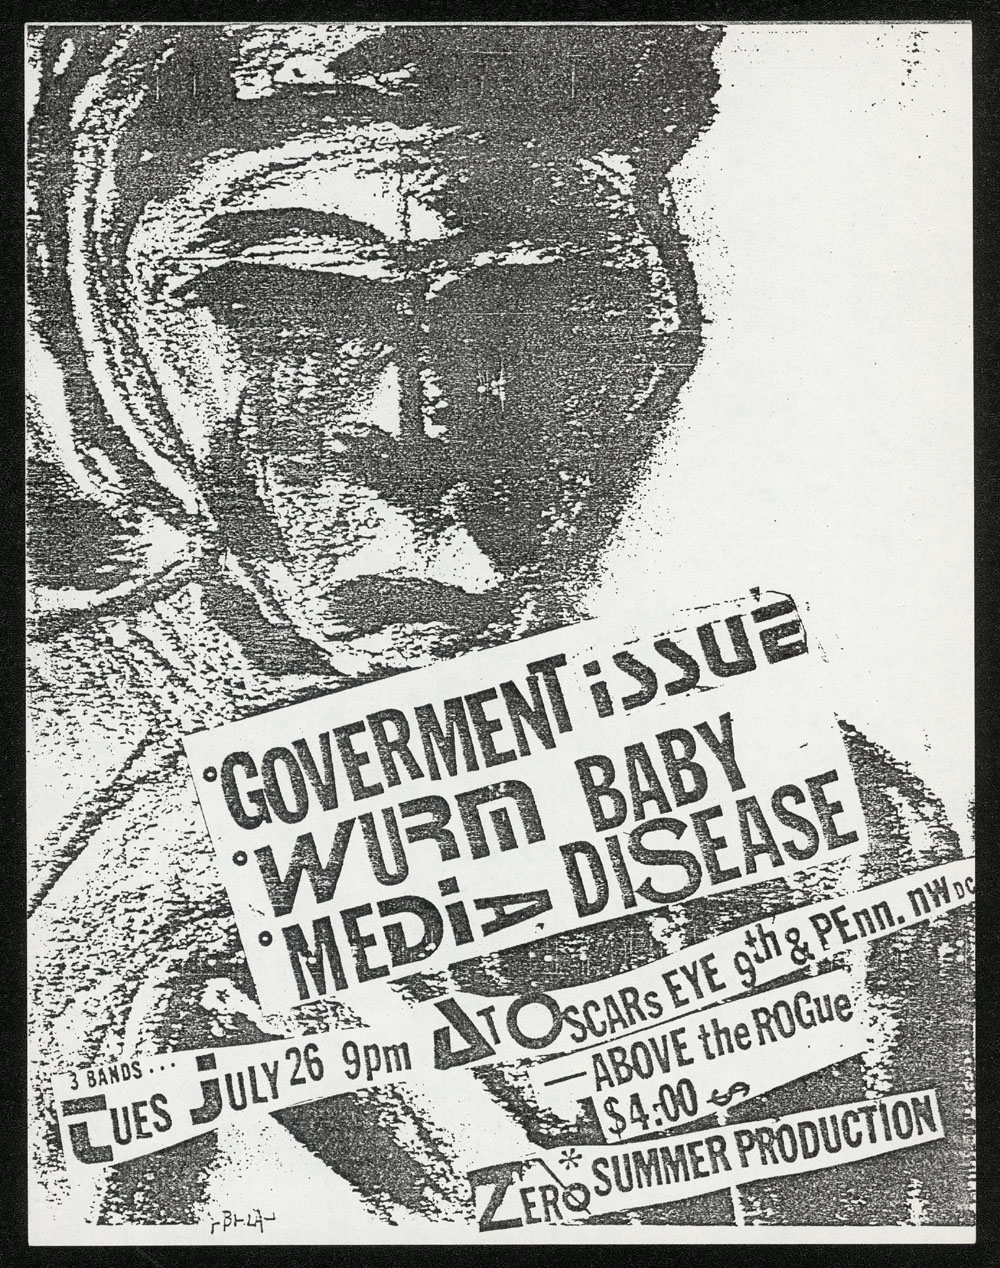 GOVERNMENT ISSUE w/ Wurm Baby, Media Disease at Oscar's Eye